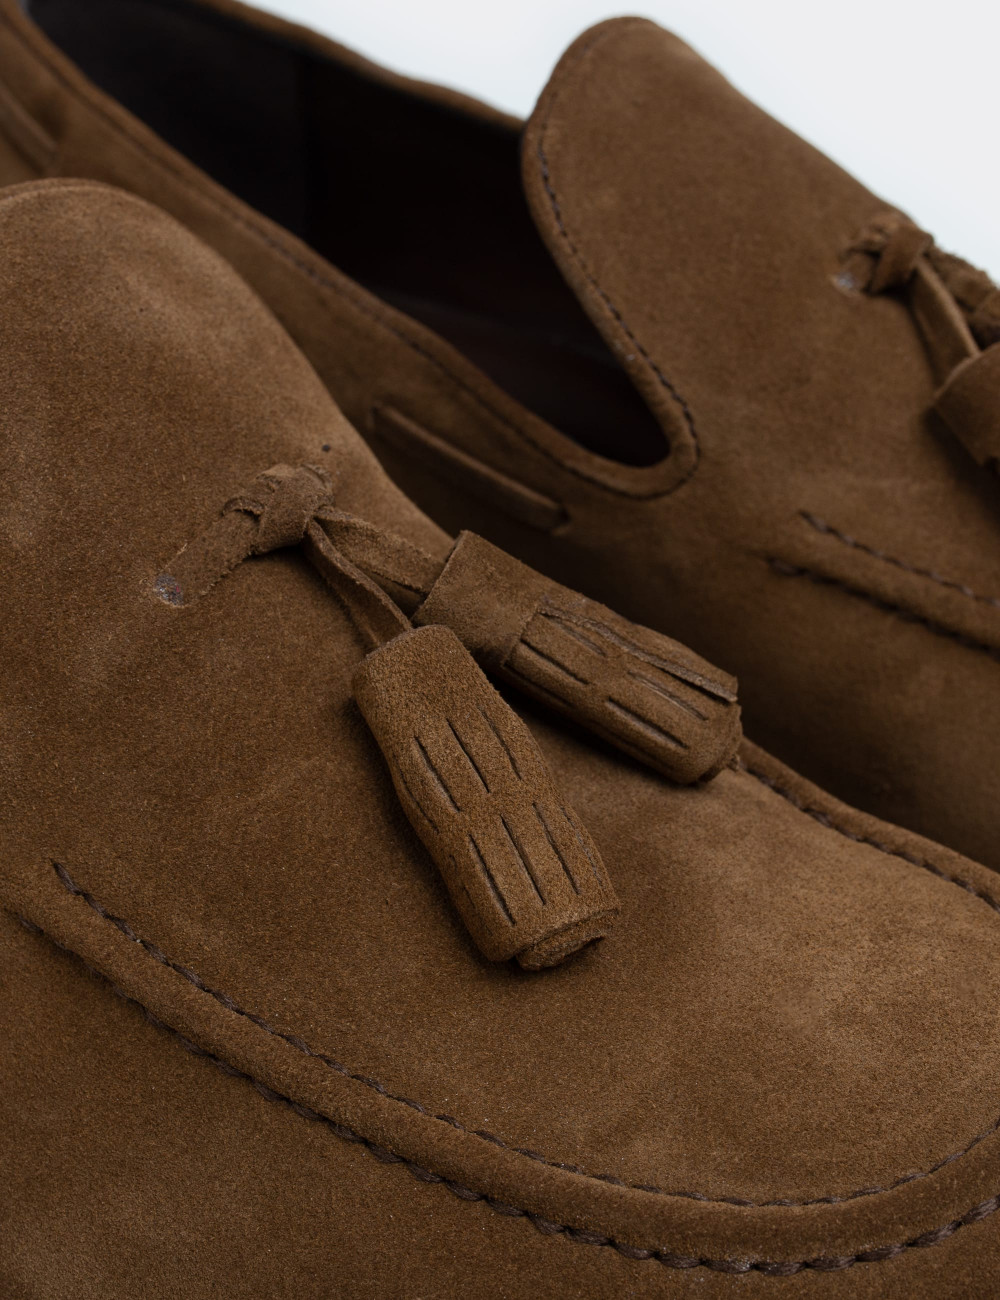 Tan Suede Leather Loafers - 01319MTBAE02